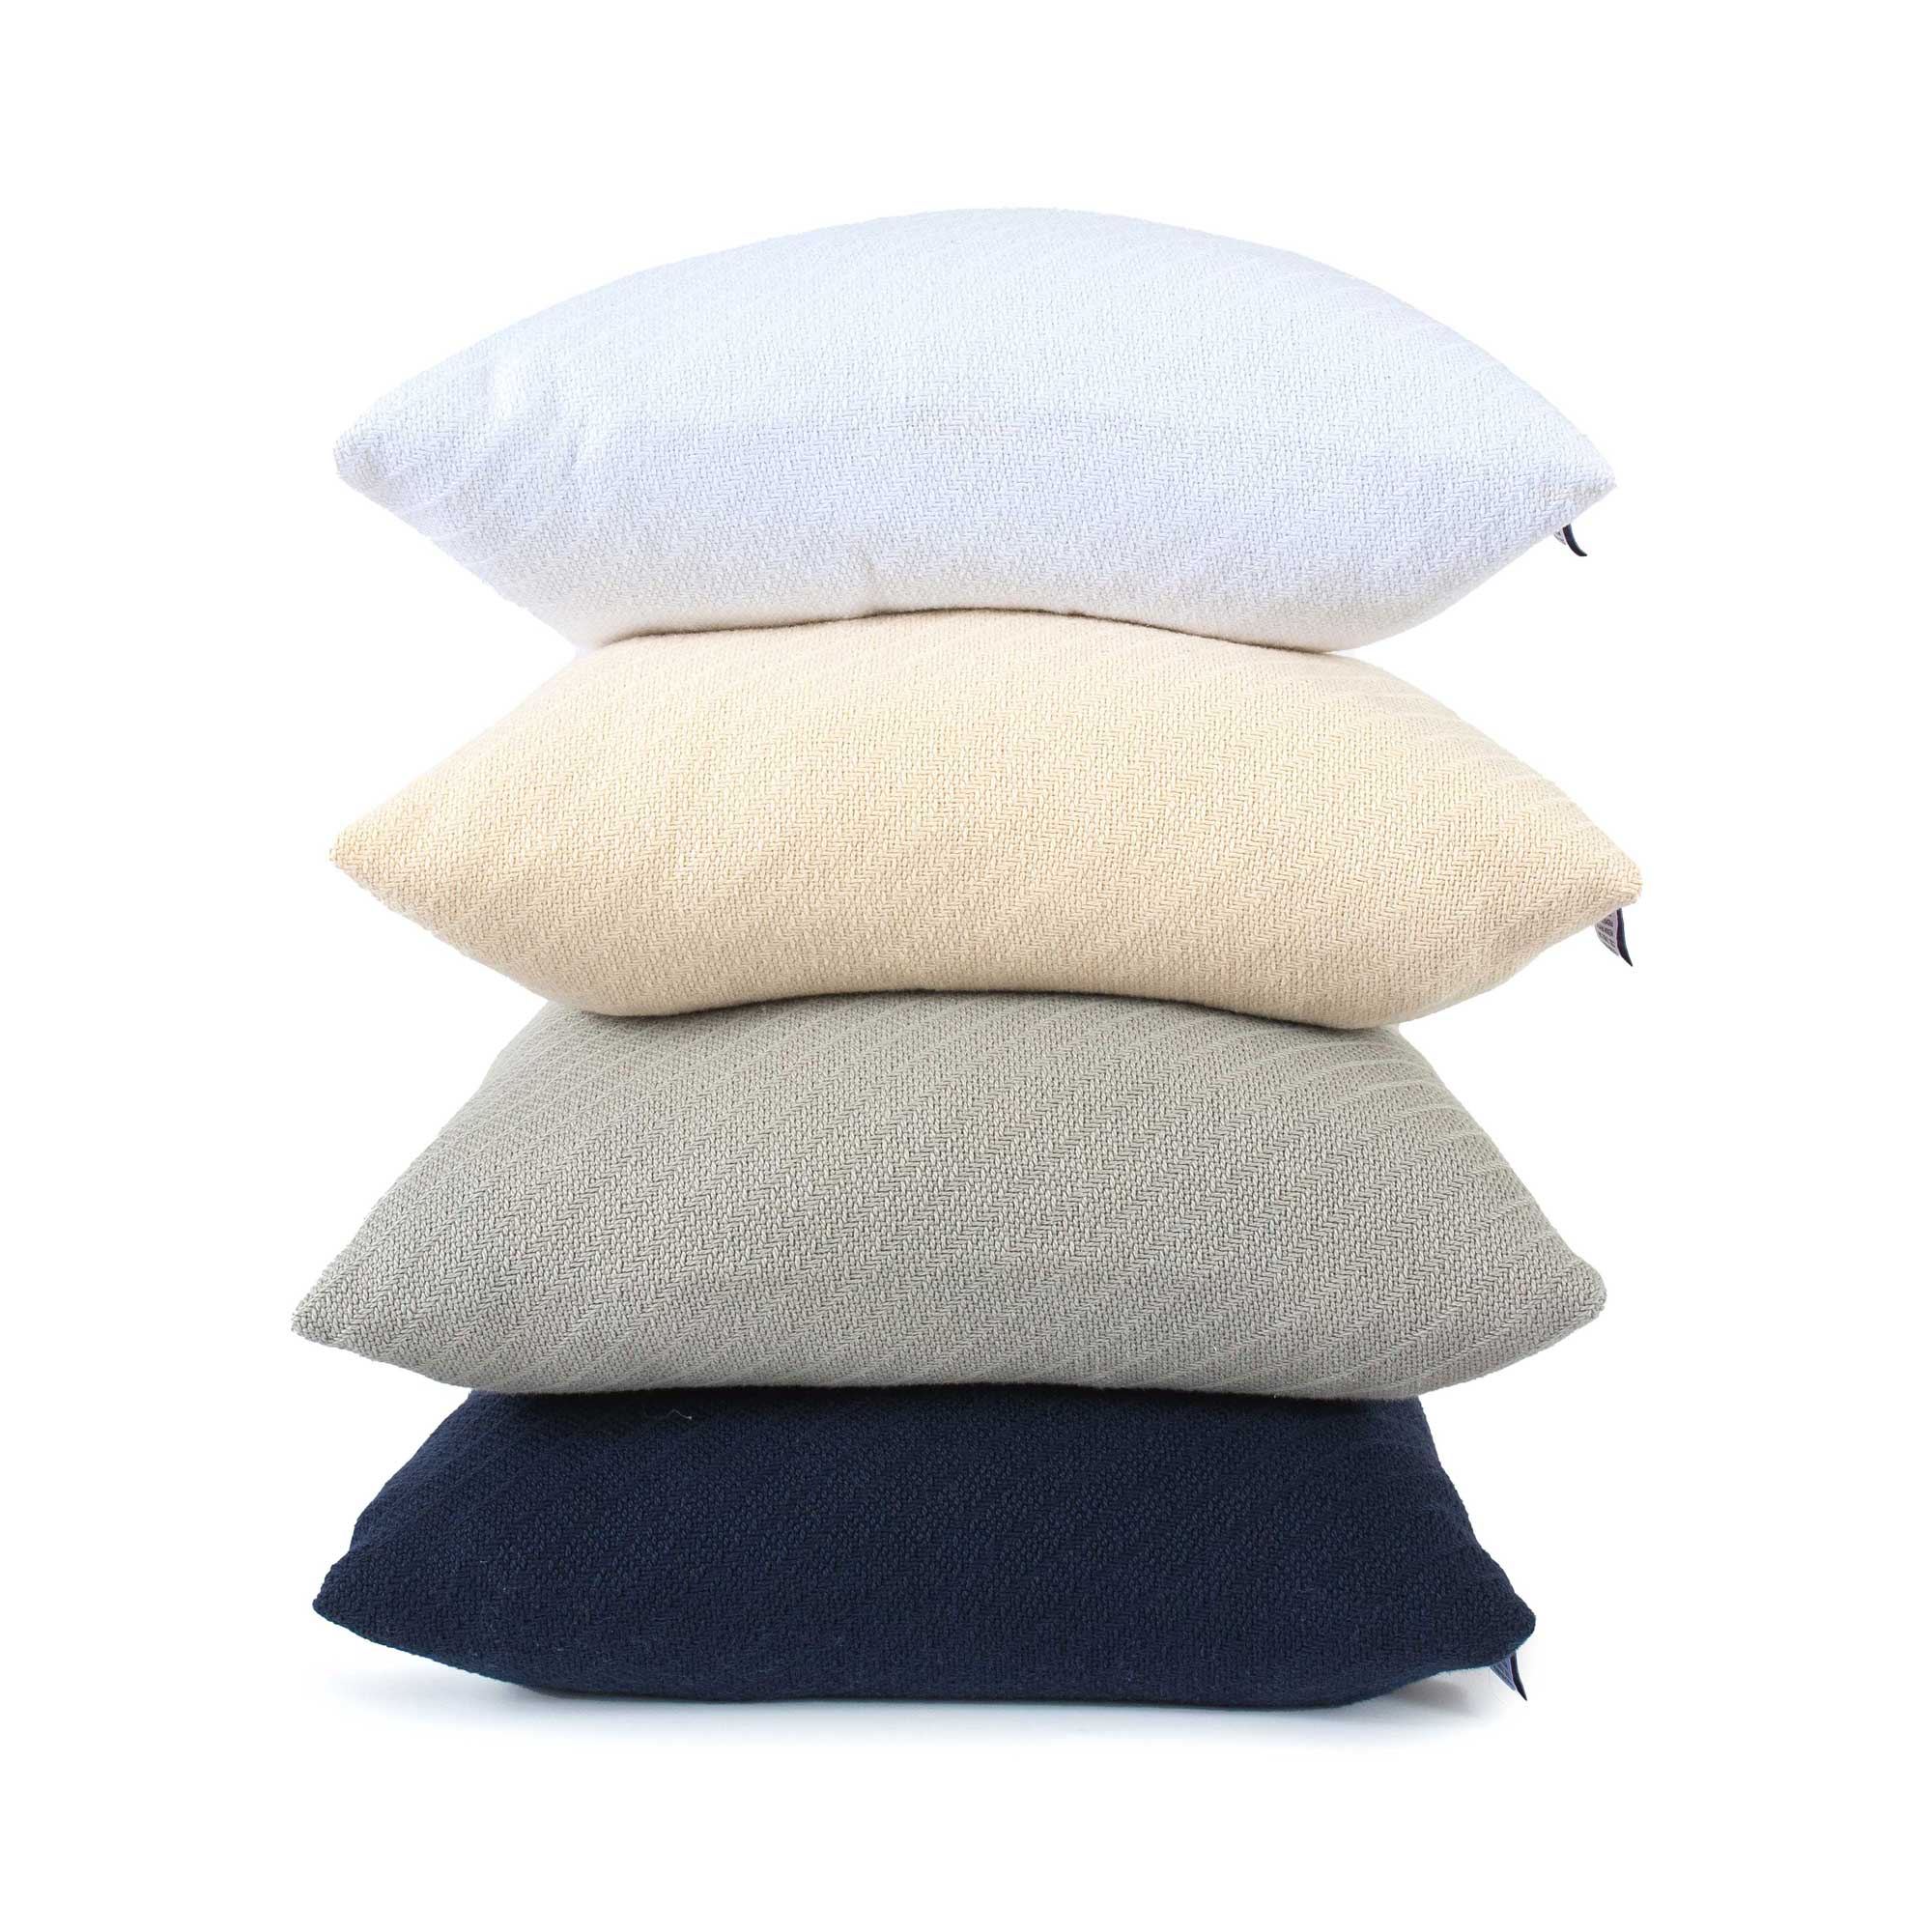 Stacked Cotton Throw Pillows - American Blanket Company